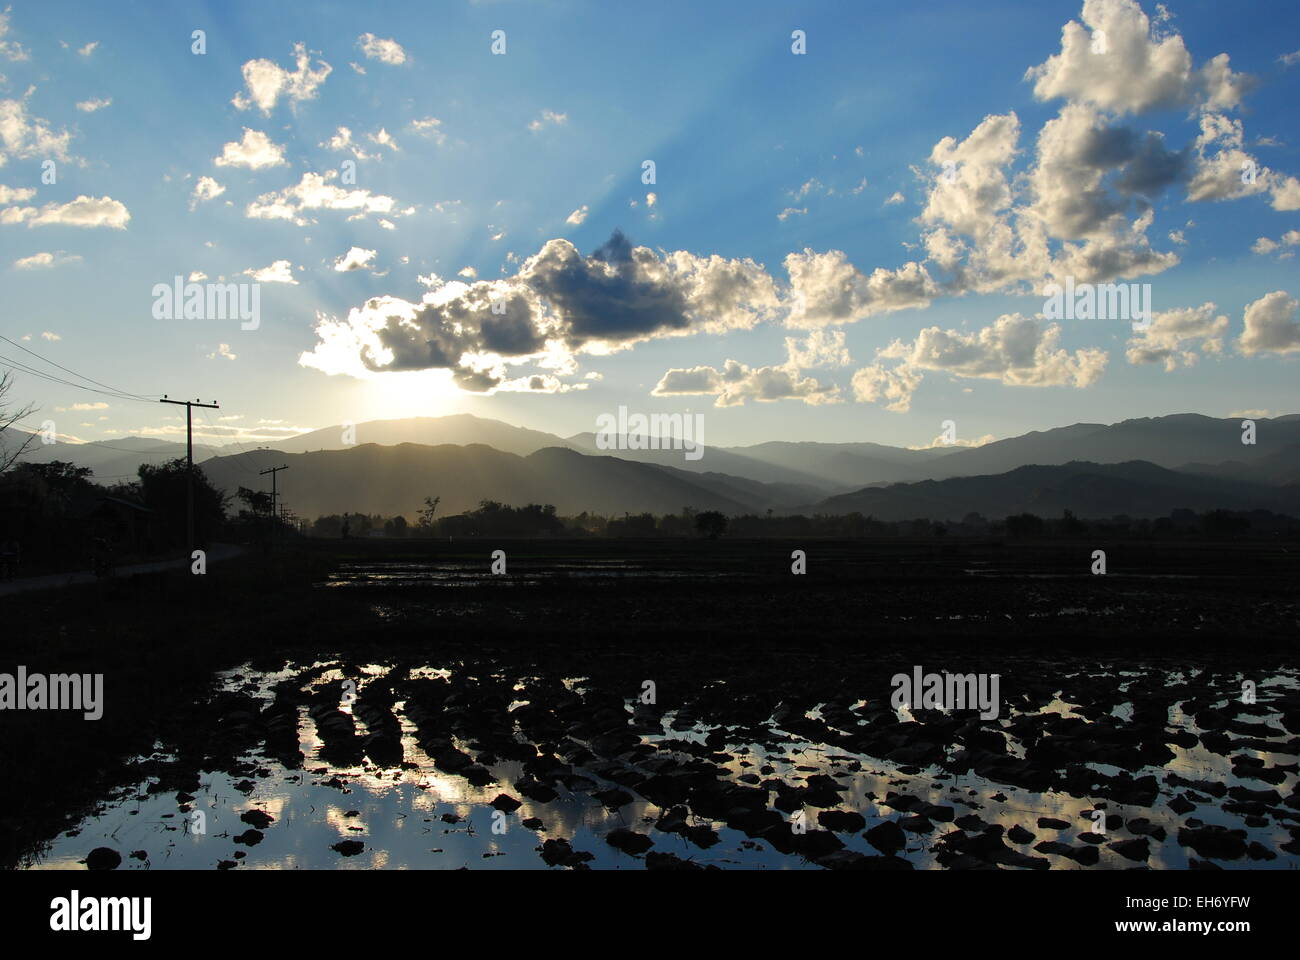 Landscape at Sunset near Kengtung Stock Photo